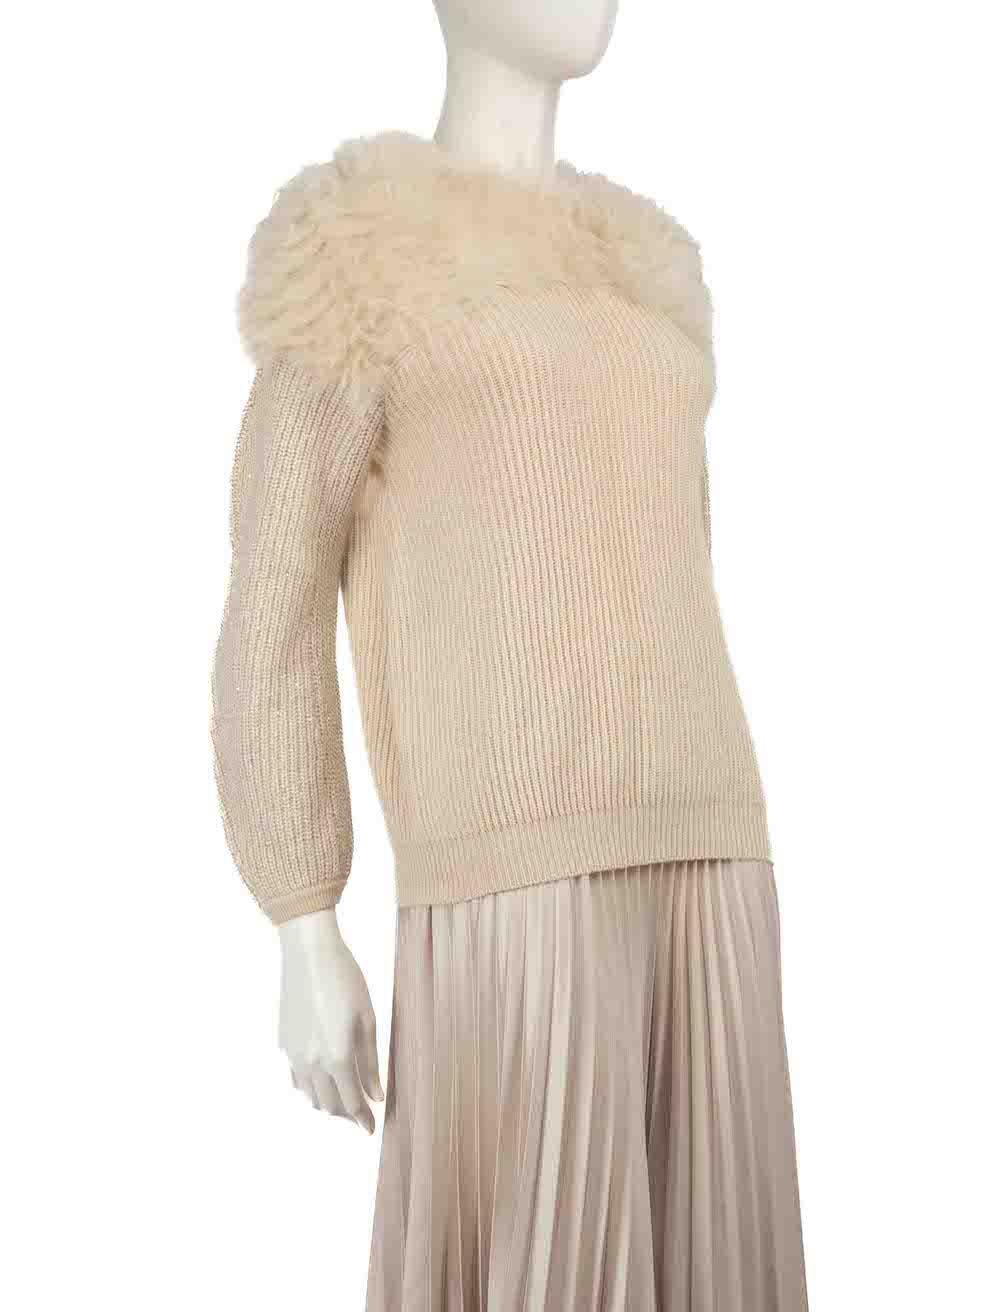 CONDITION is Very good. Hardly any visible wear to knit is evident on this used Brunello Cucinelli designer resale item.
 
 
 
 Details
 
 
 Beige
 
 Cashmere
 
 Long sleeves jumper
 
 Knitted and stretchy
 
 Round neckline
 
 Goat fur trim on